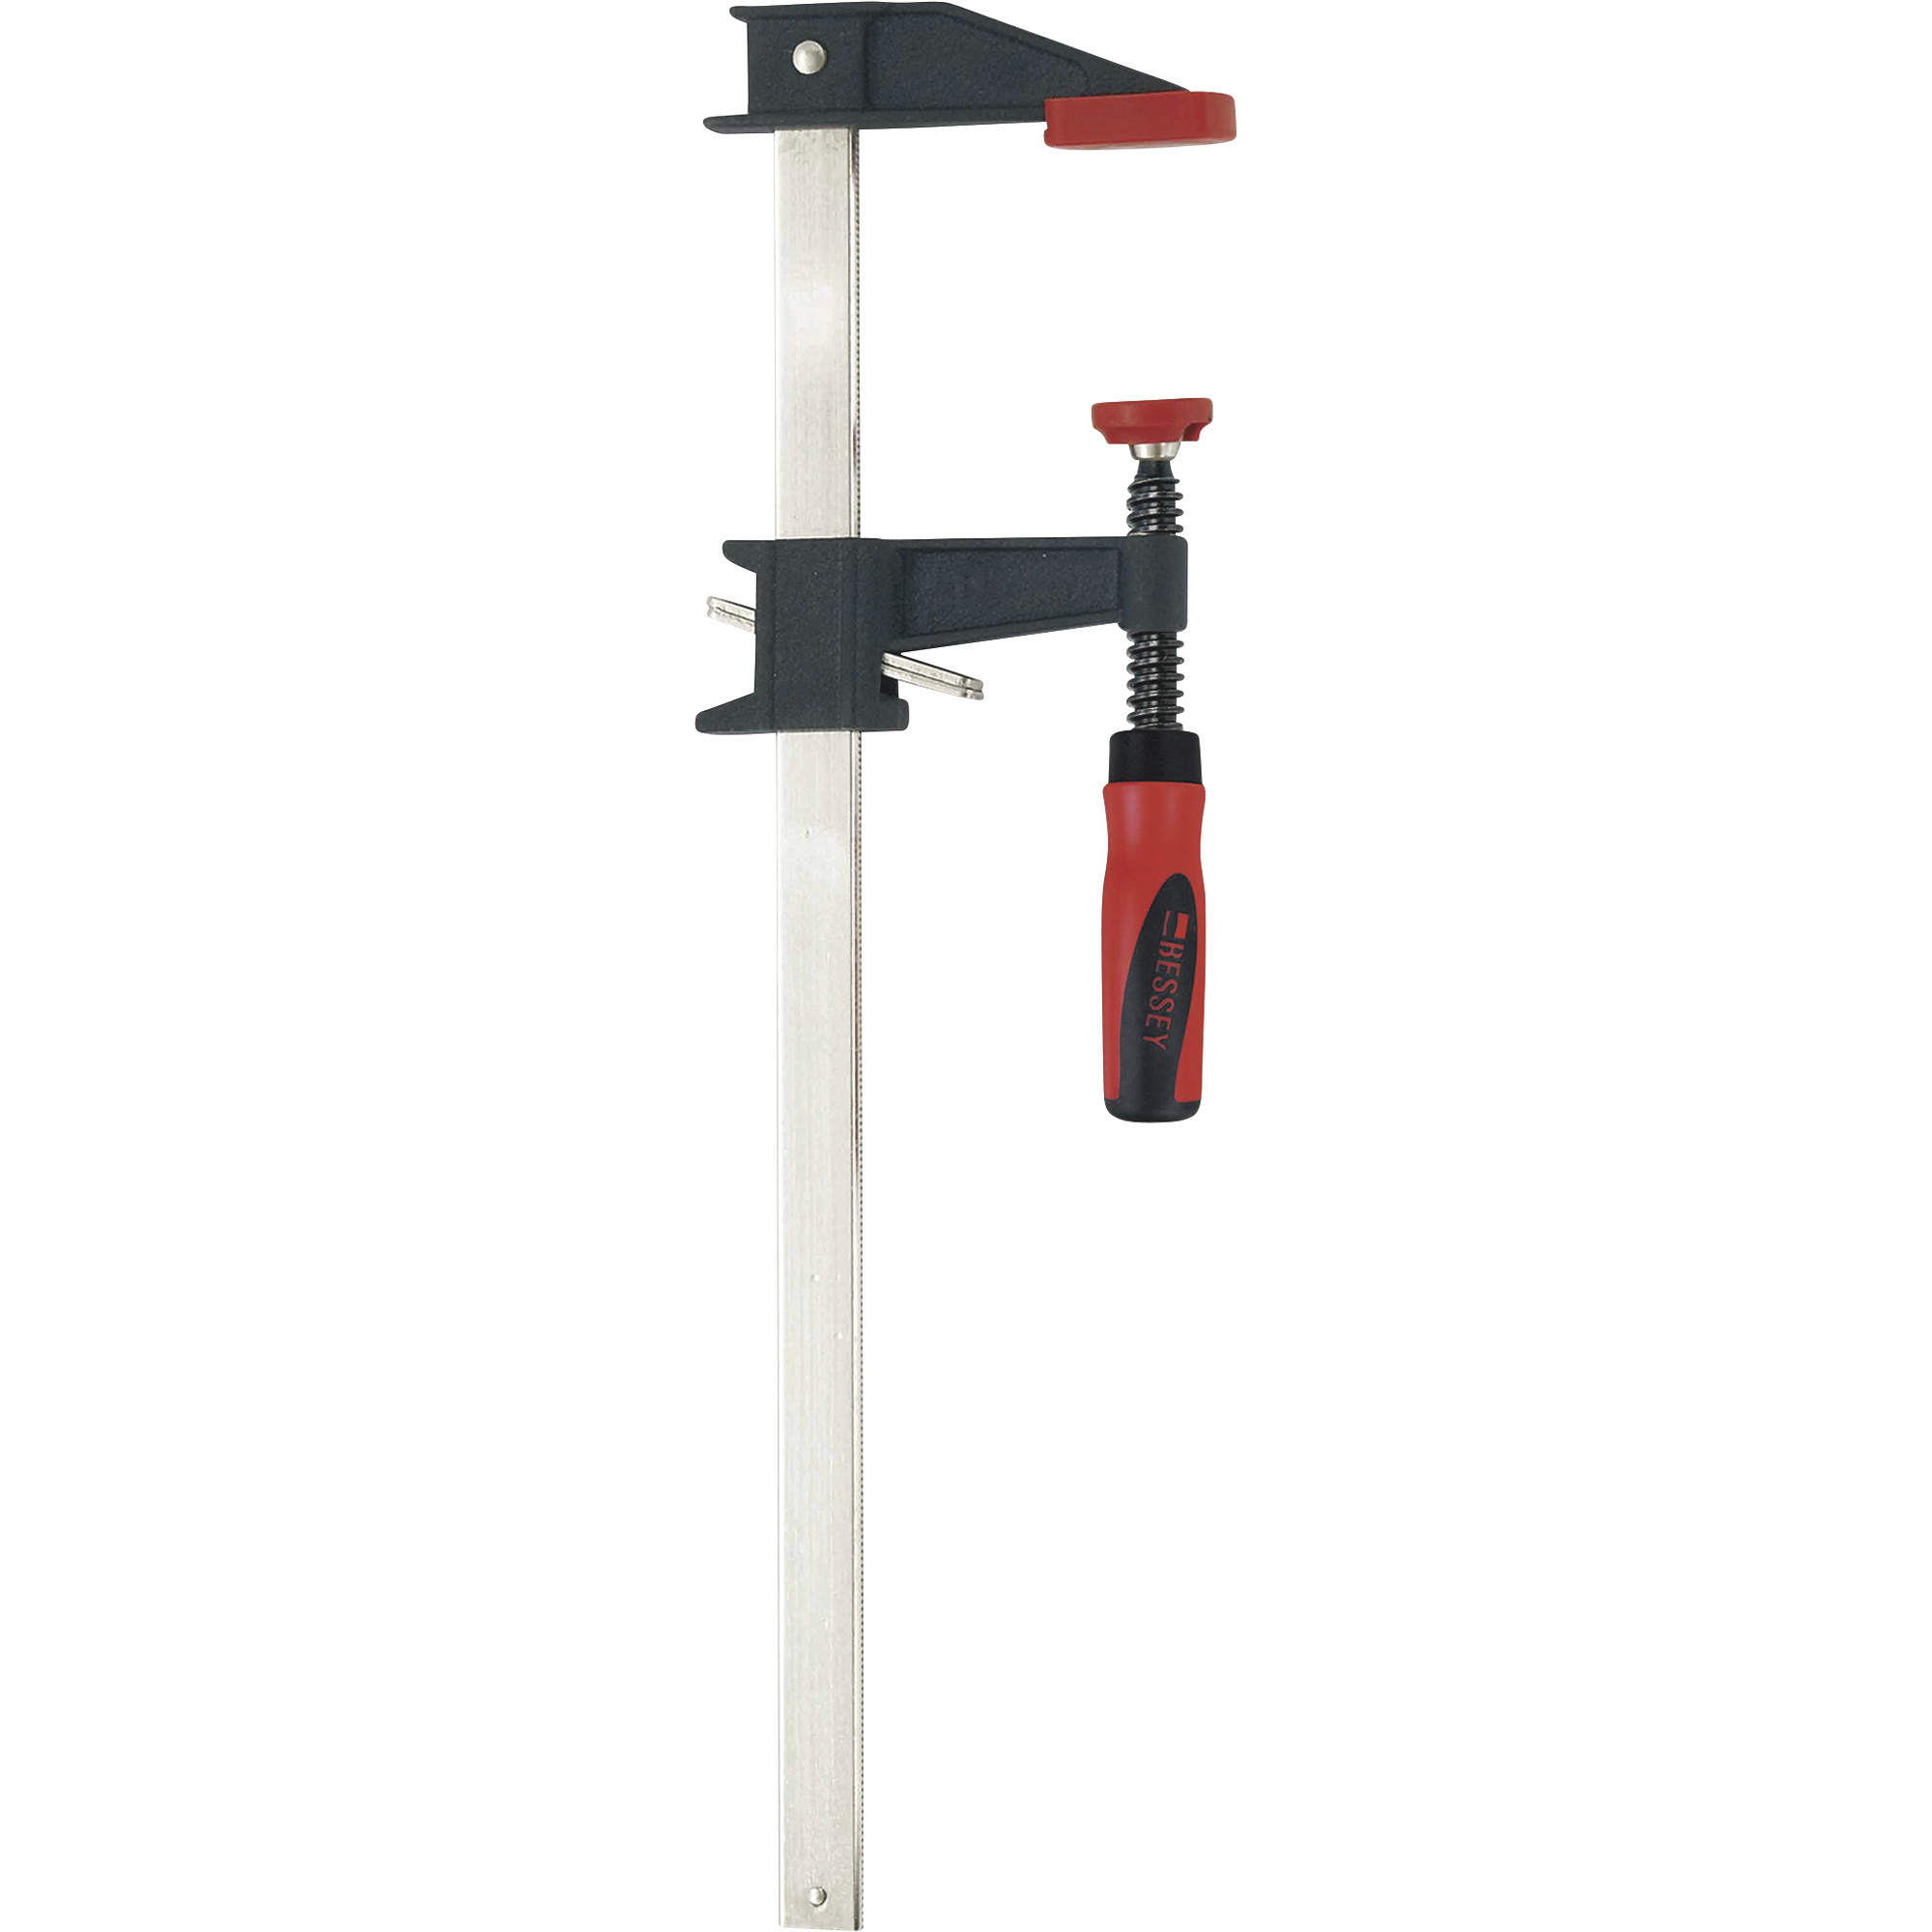 Bessey 36Inch Clutch Style Bar Clamp, 1,100-Lb. Clamping Pressure, 3 1/2Inch Throat Depth, Model GSCC3.536+2K